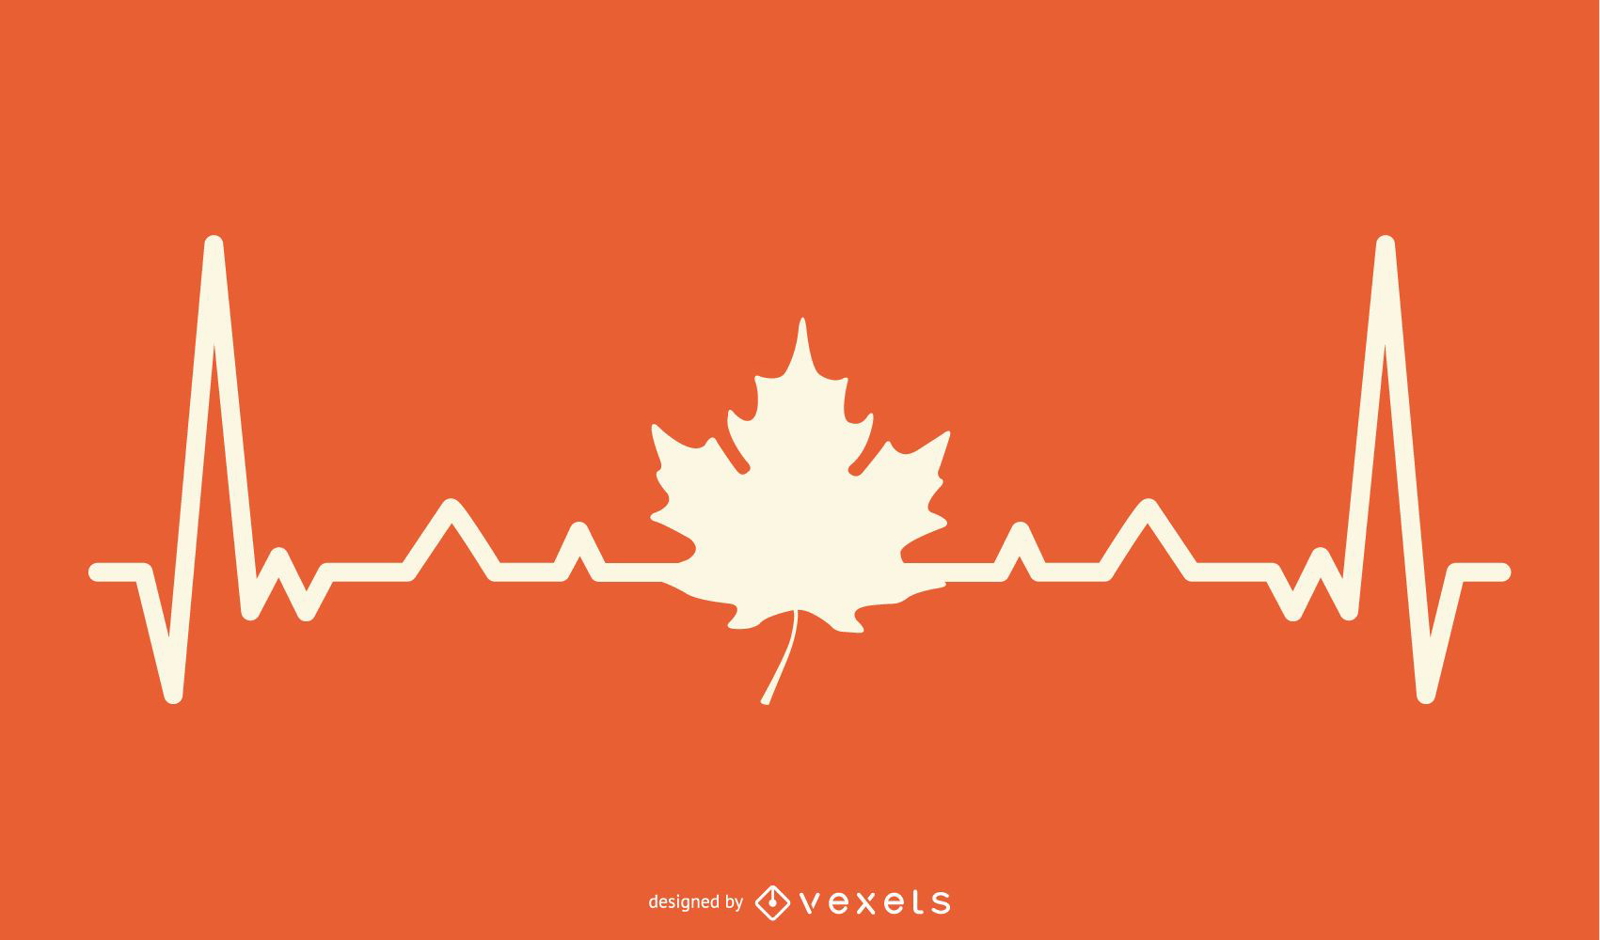 Maple Leaf with Heartbeat Line Design